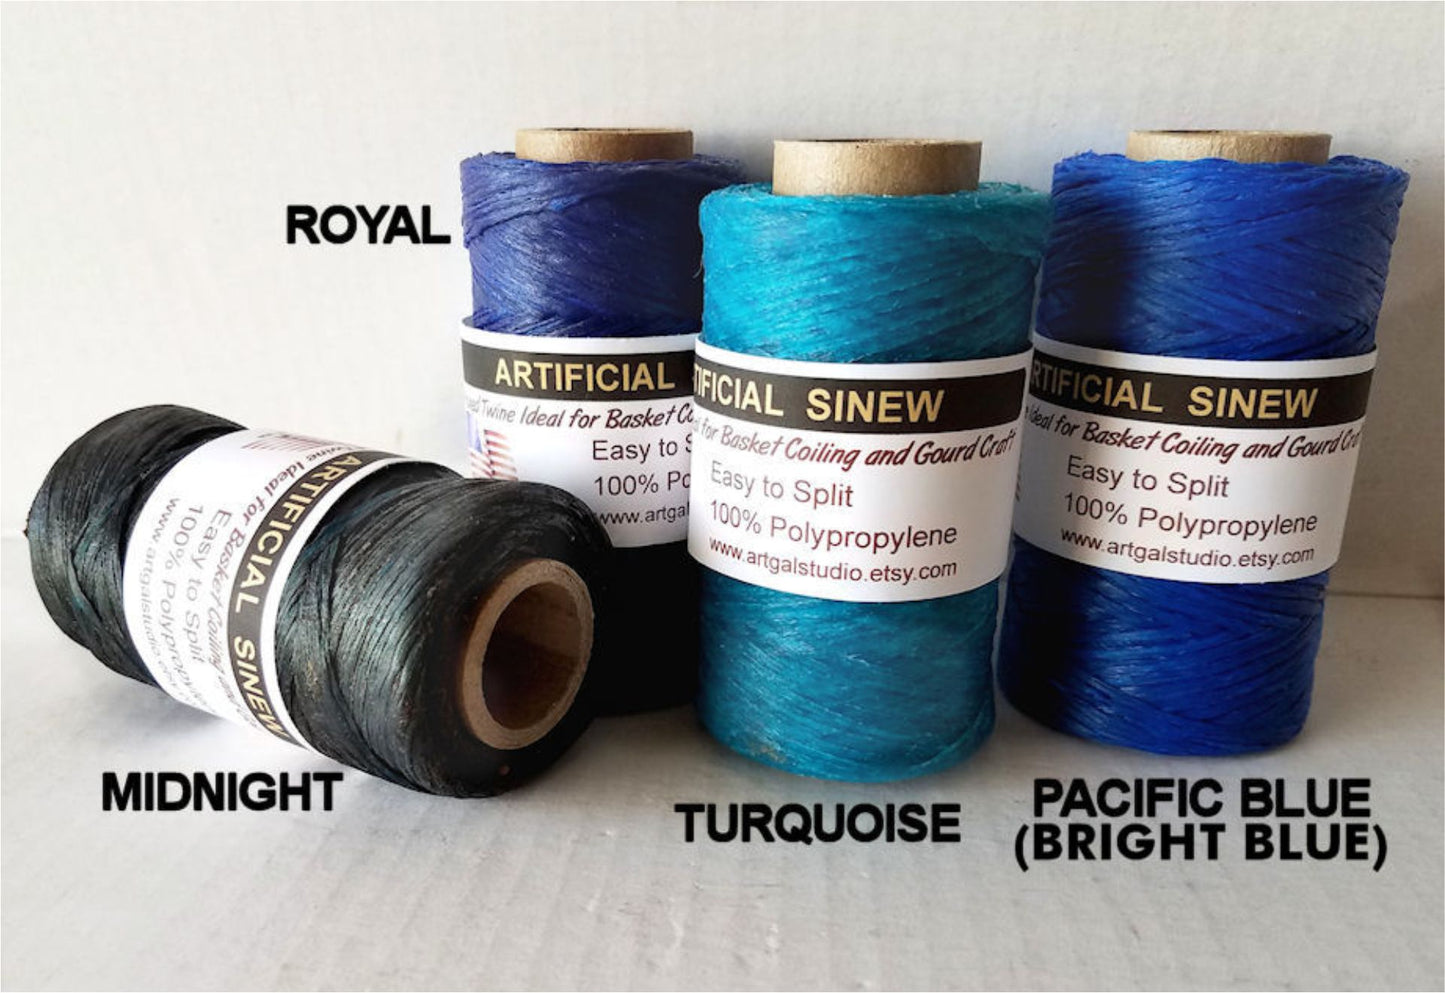 Imitation / Artificial Sinew 4 oz spools in shades of blue